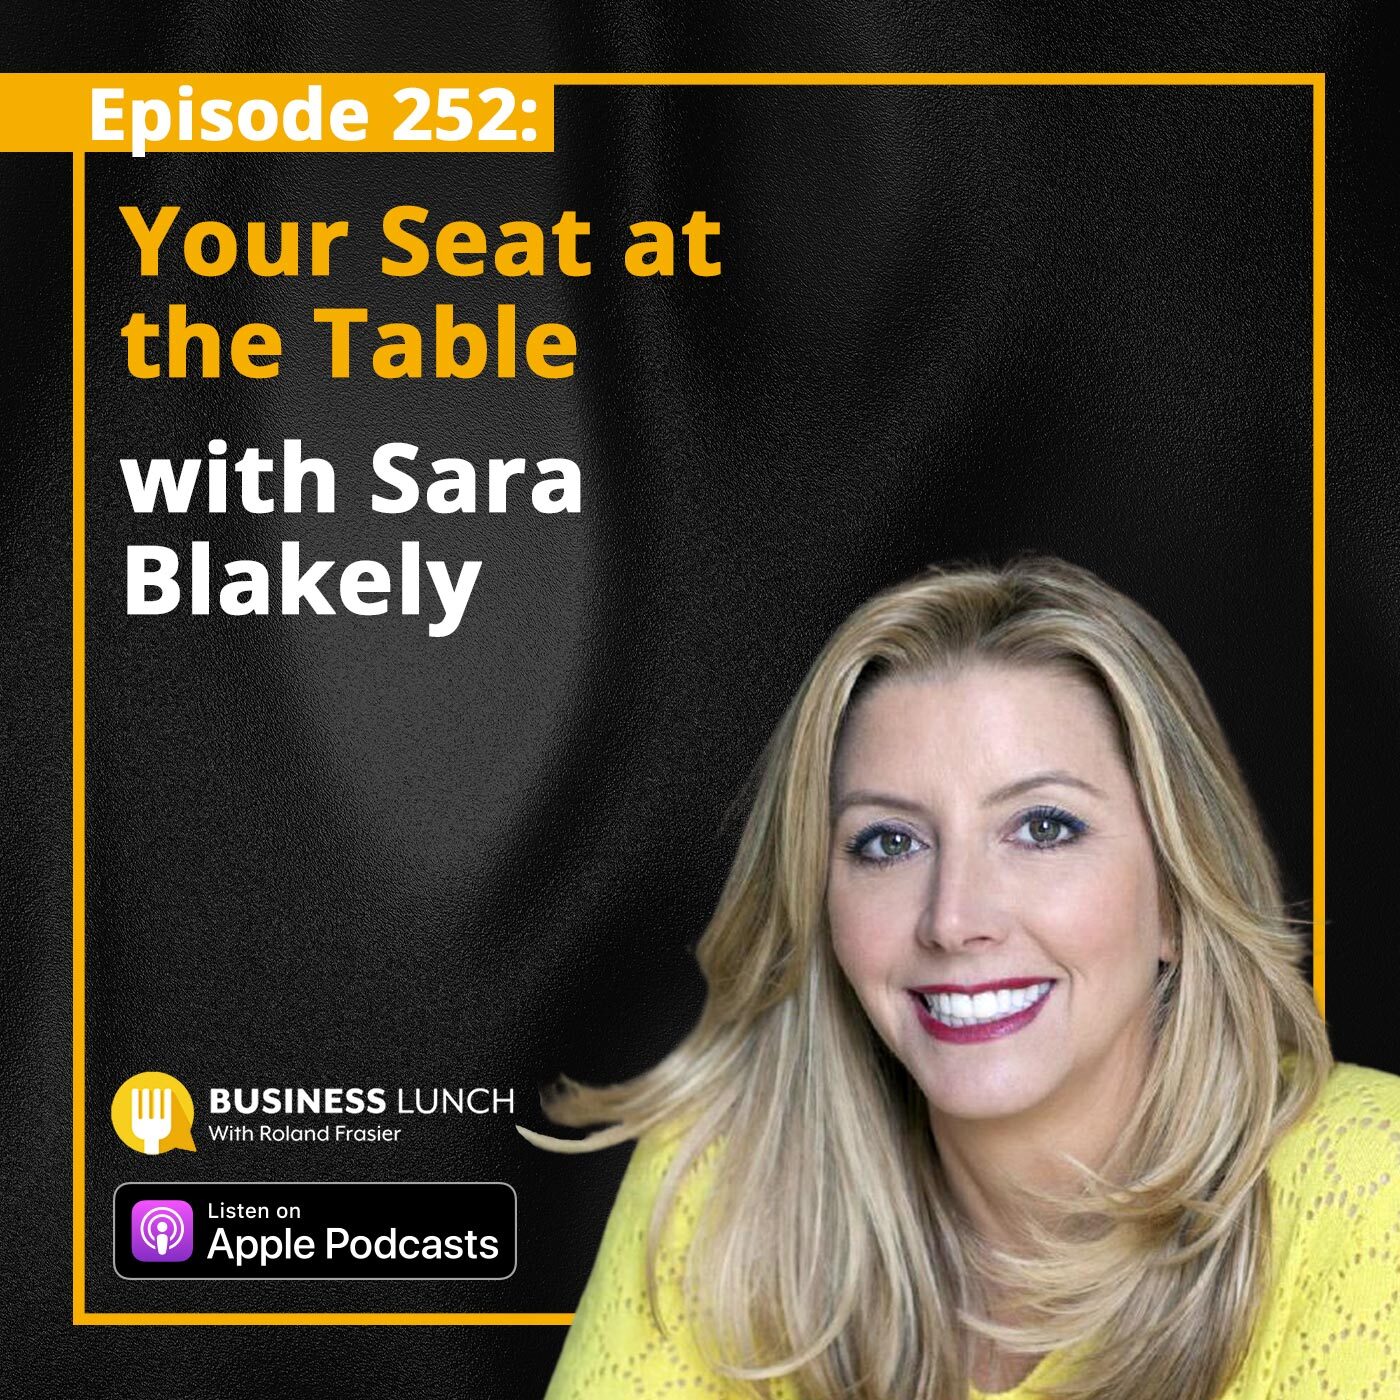 Sara Blakely - 2012 TIME 100: The Most Influential People in the World -  TIME